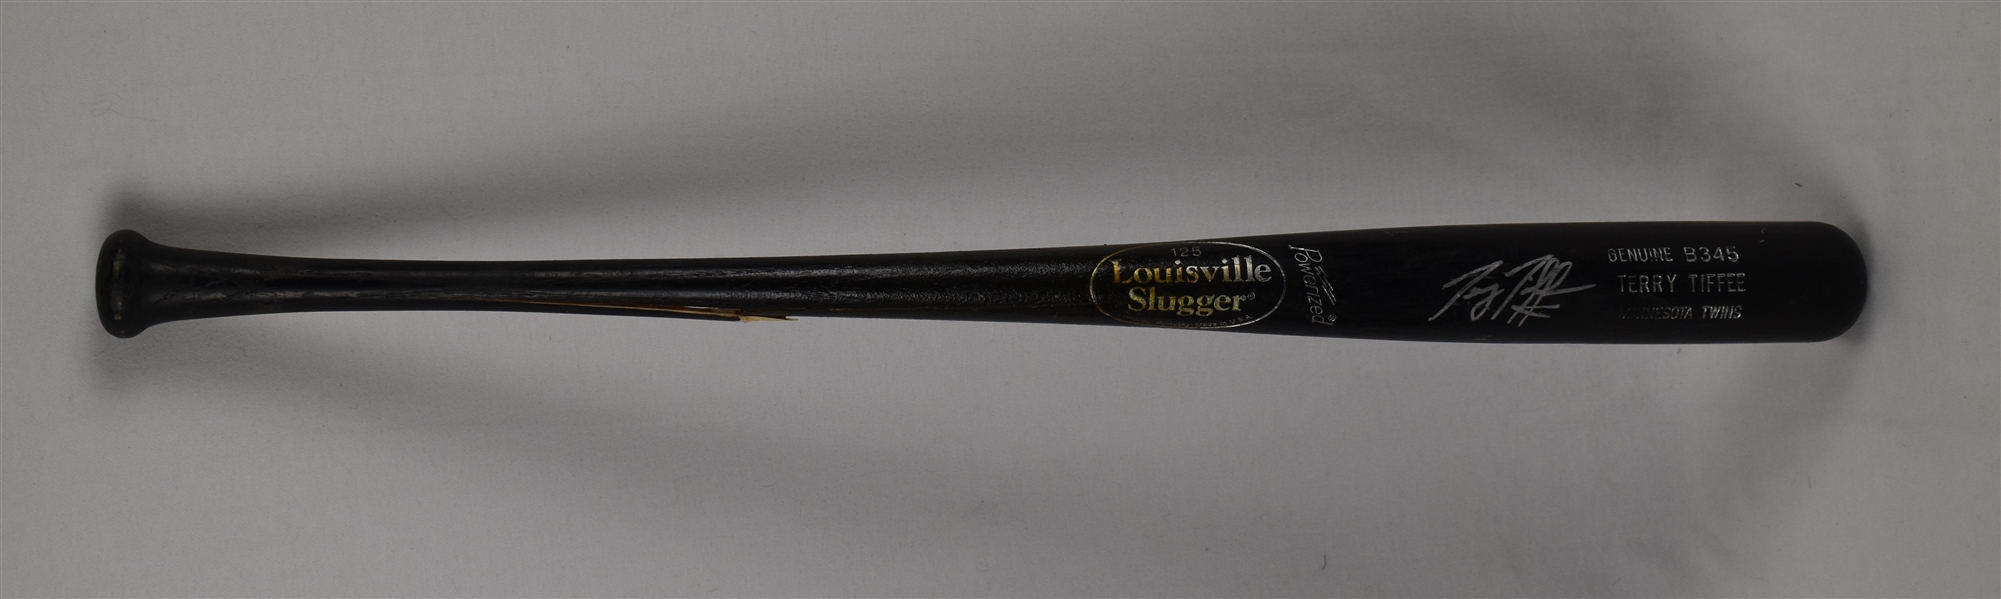 Terry Tiffee Game Used & Autographed Bat